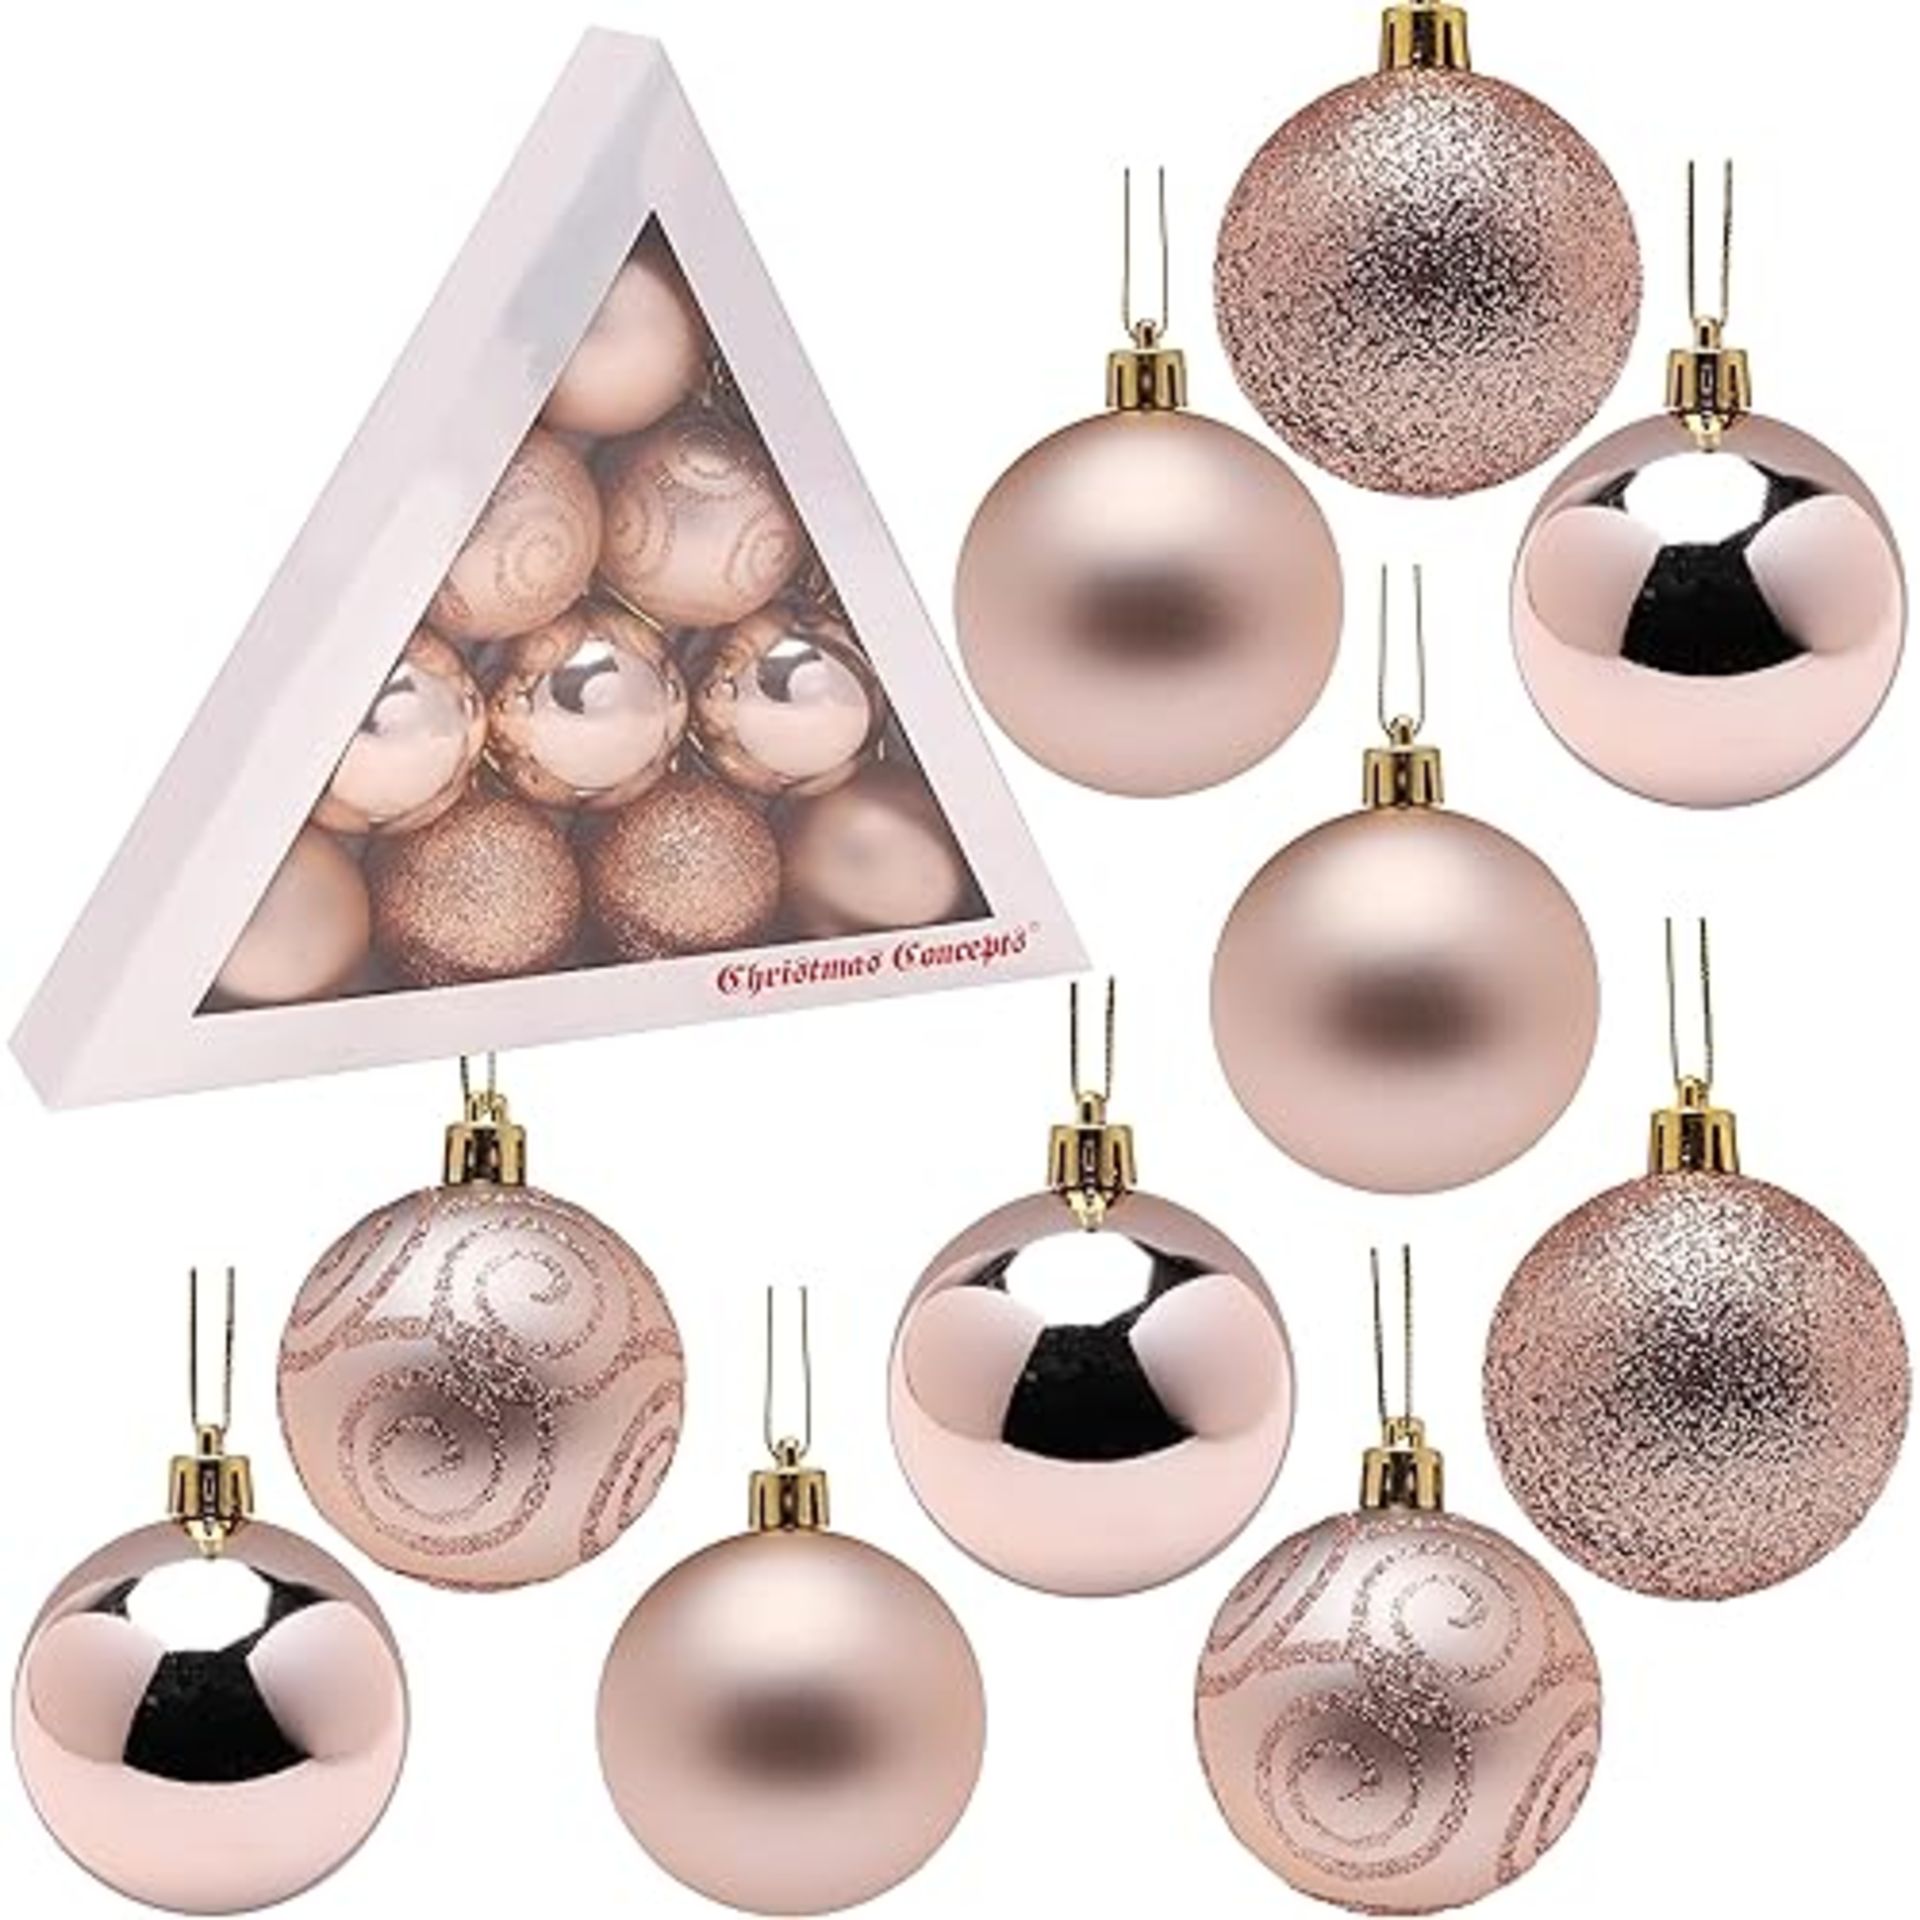 Christmas Concepts® Pack of 10-60mm Christmas Tree Baubles - Shiny, Matte & Glitter Decorated Baub